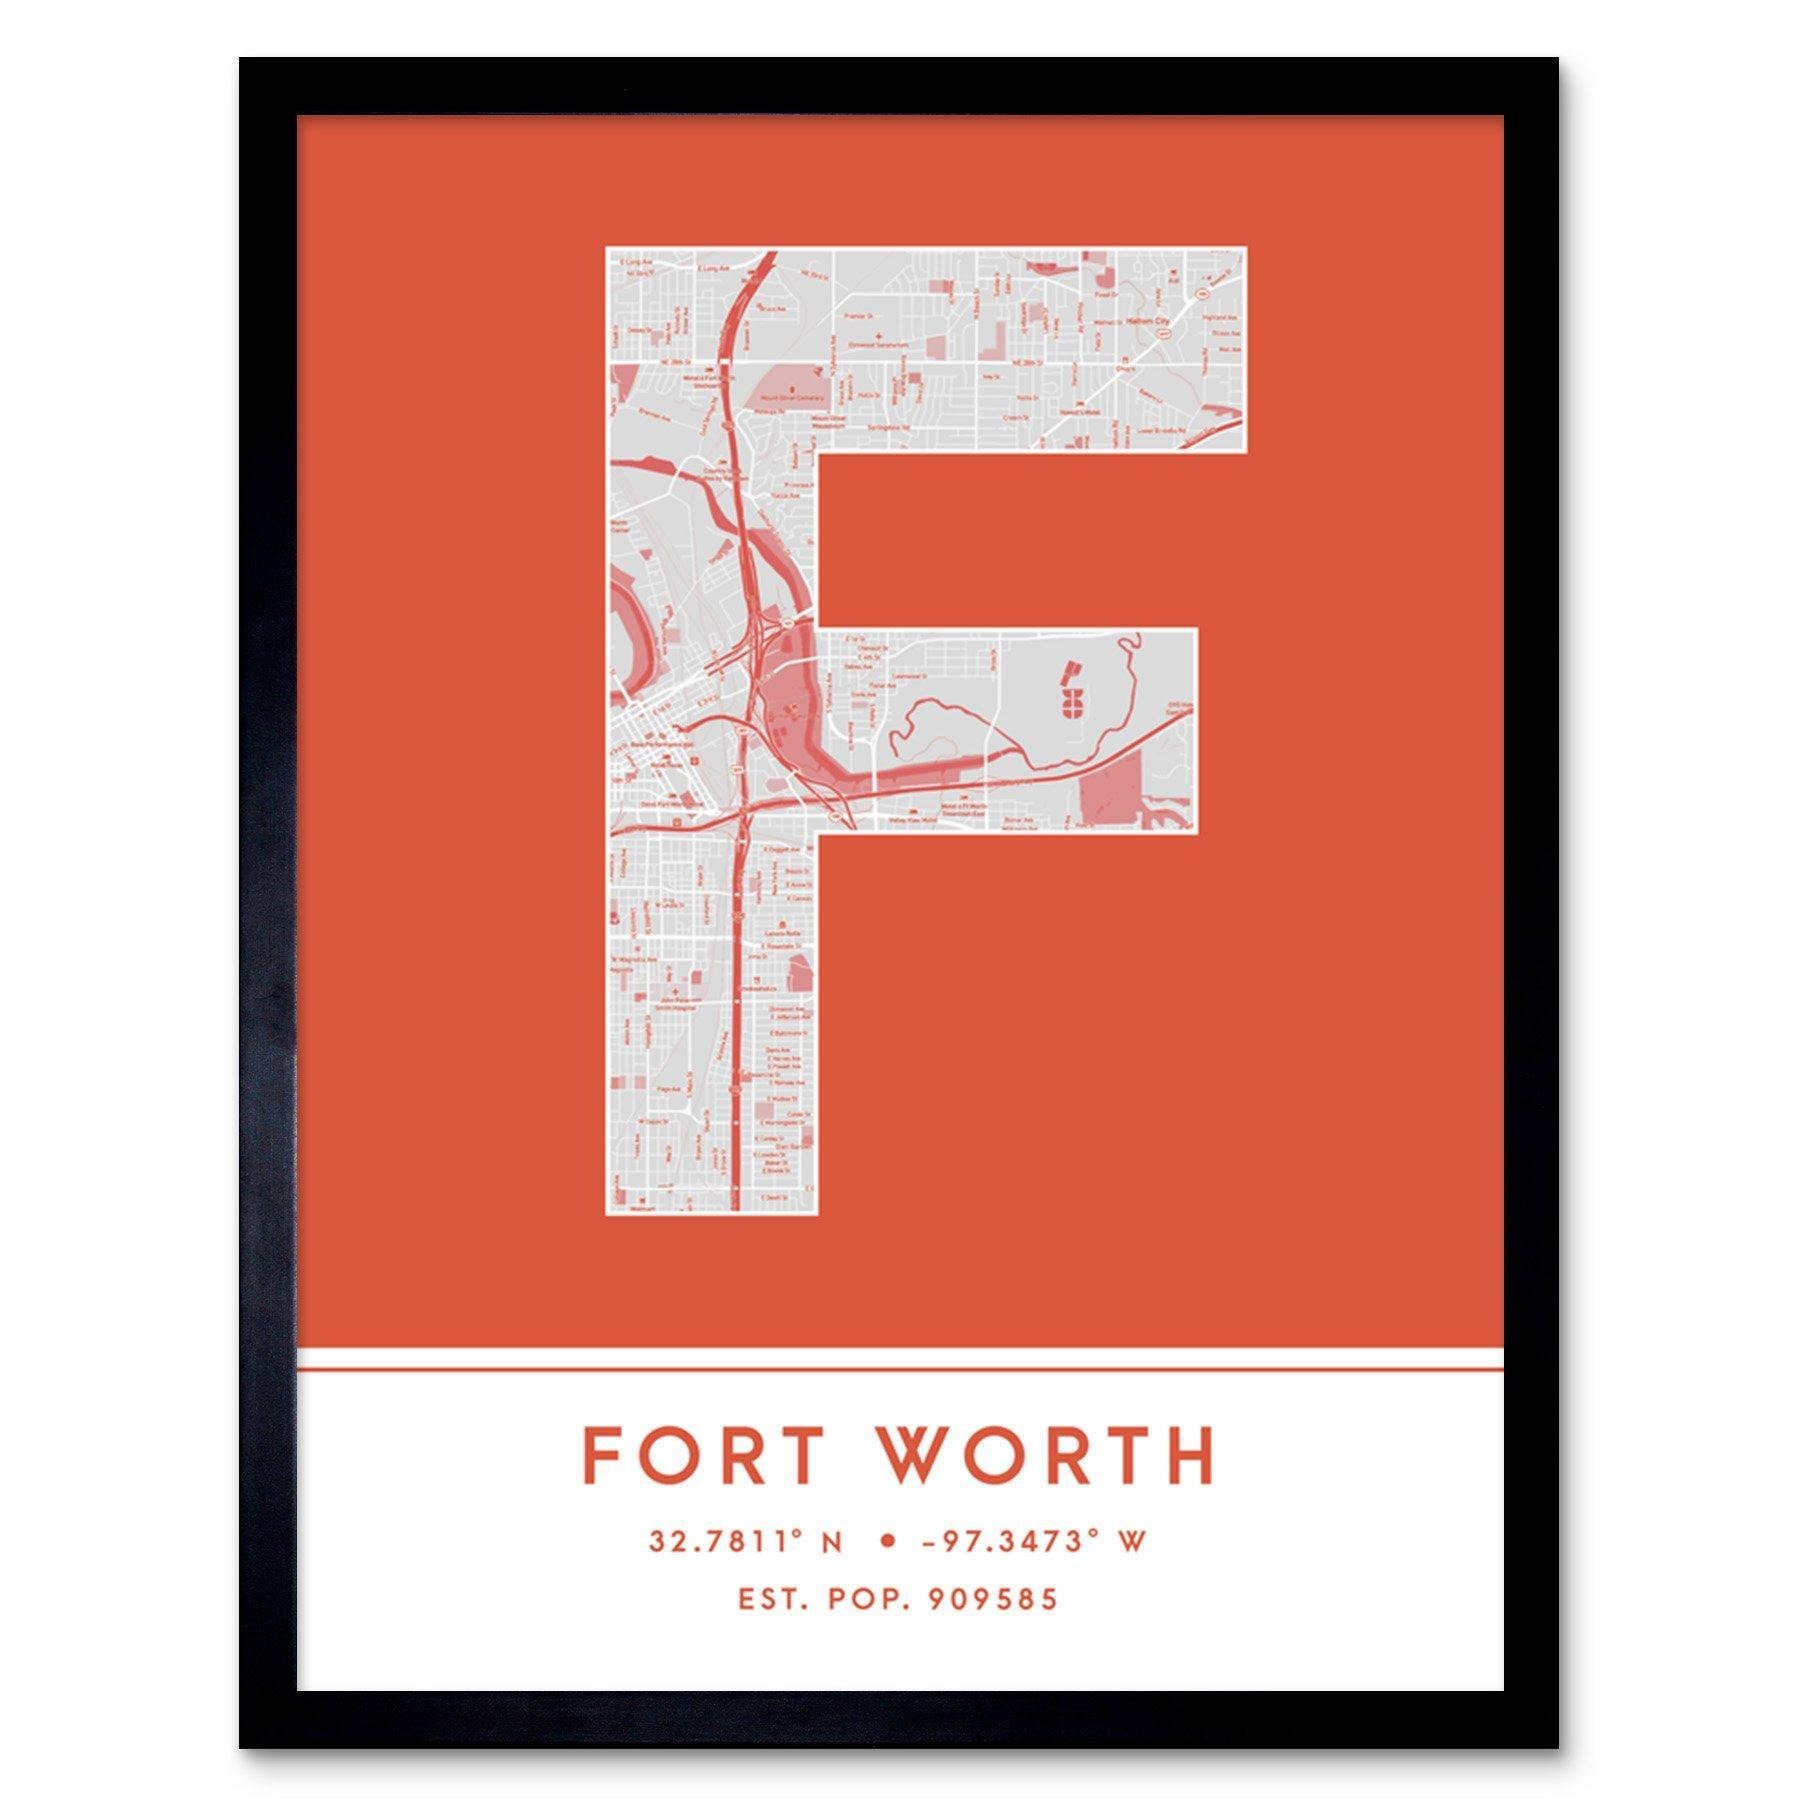 Fort Worth Texas United States City Map Modern Typography Stylish Letter Framed Word Wall Art Print Poster for Home Décor - image 1